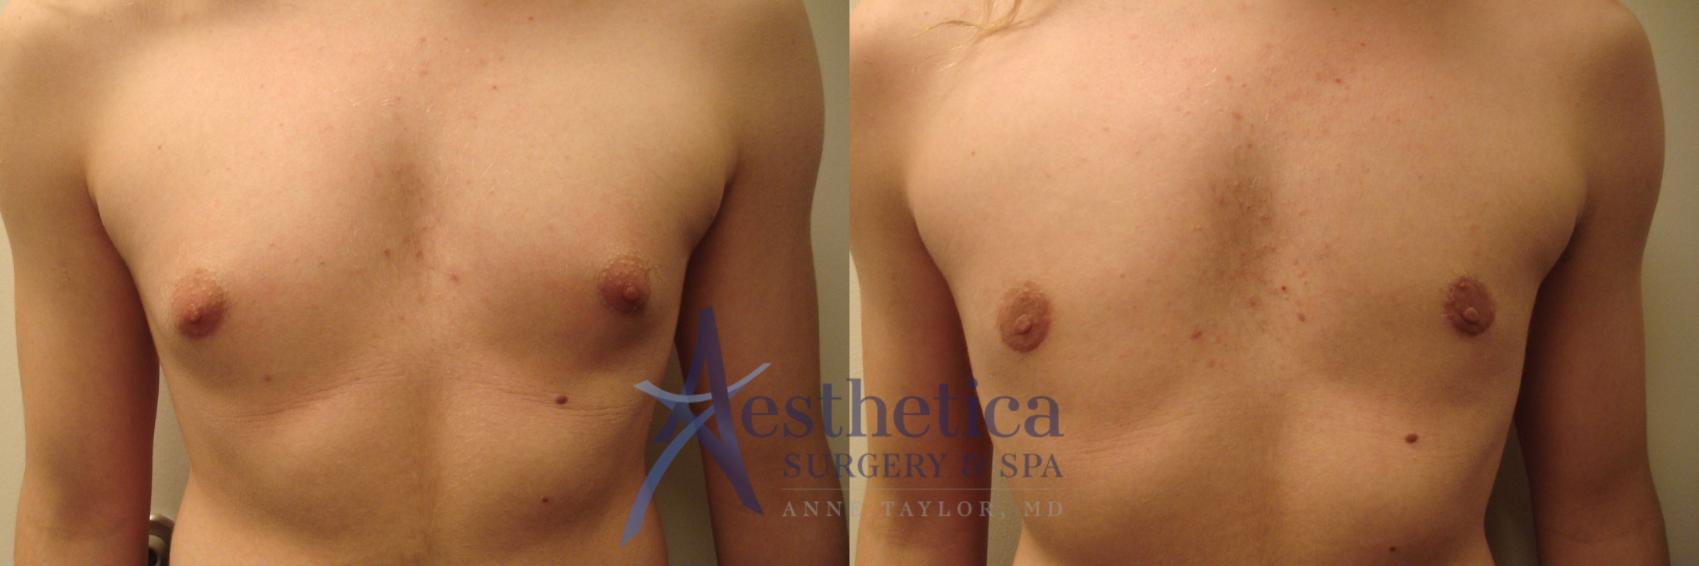 Gynecomastia Case 470 Before & After Front | Worthington, OH | Aesthetica Surgery & Spa